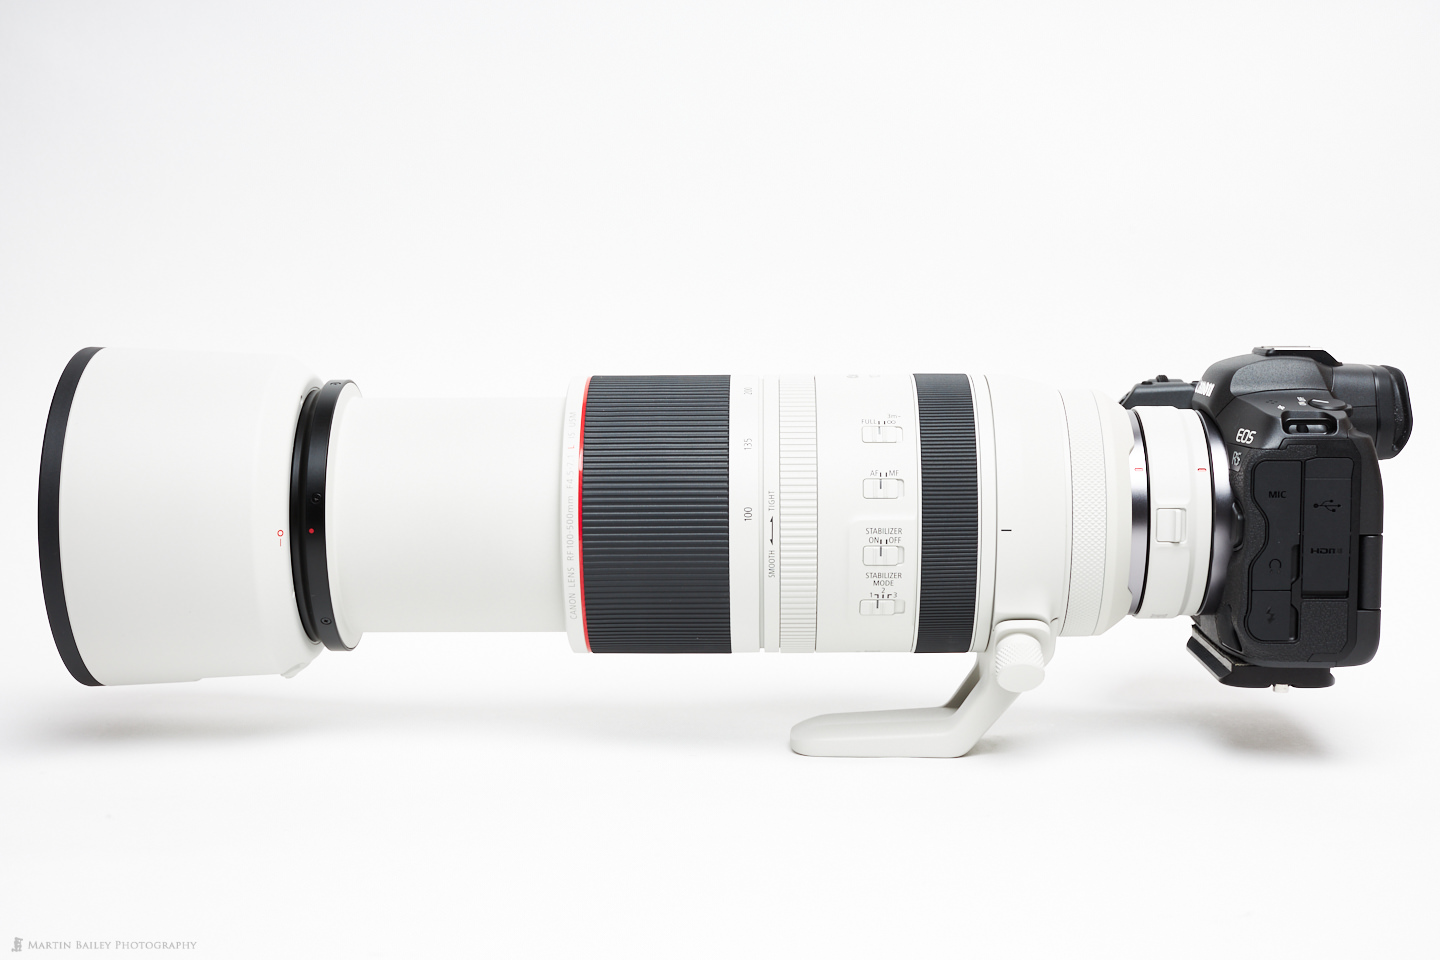 EOS R5 with RF 100-500mm Lens and RF 1.4X Extender